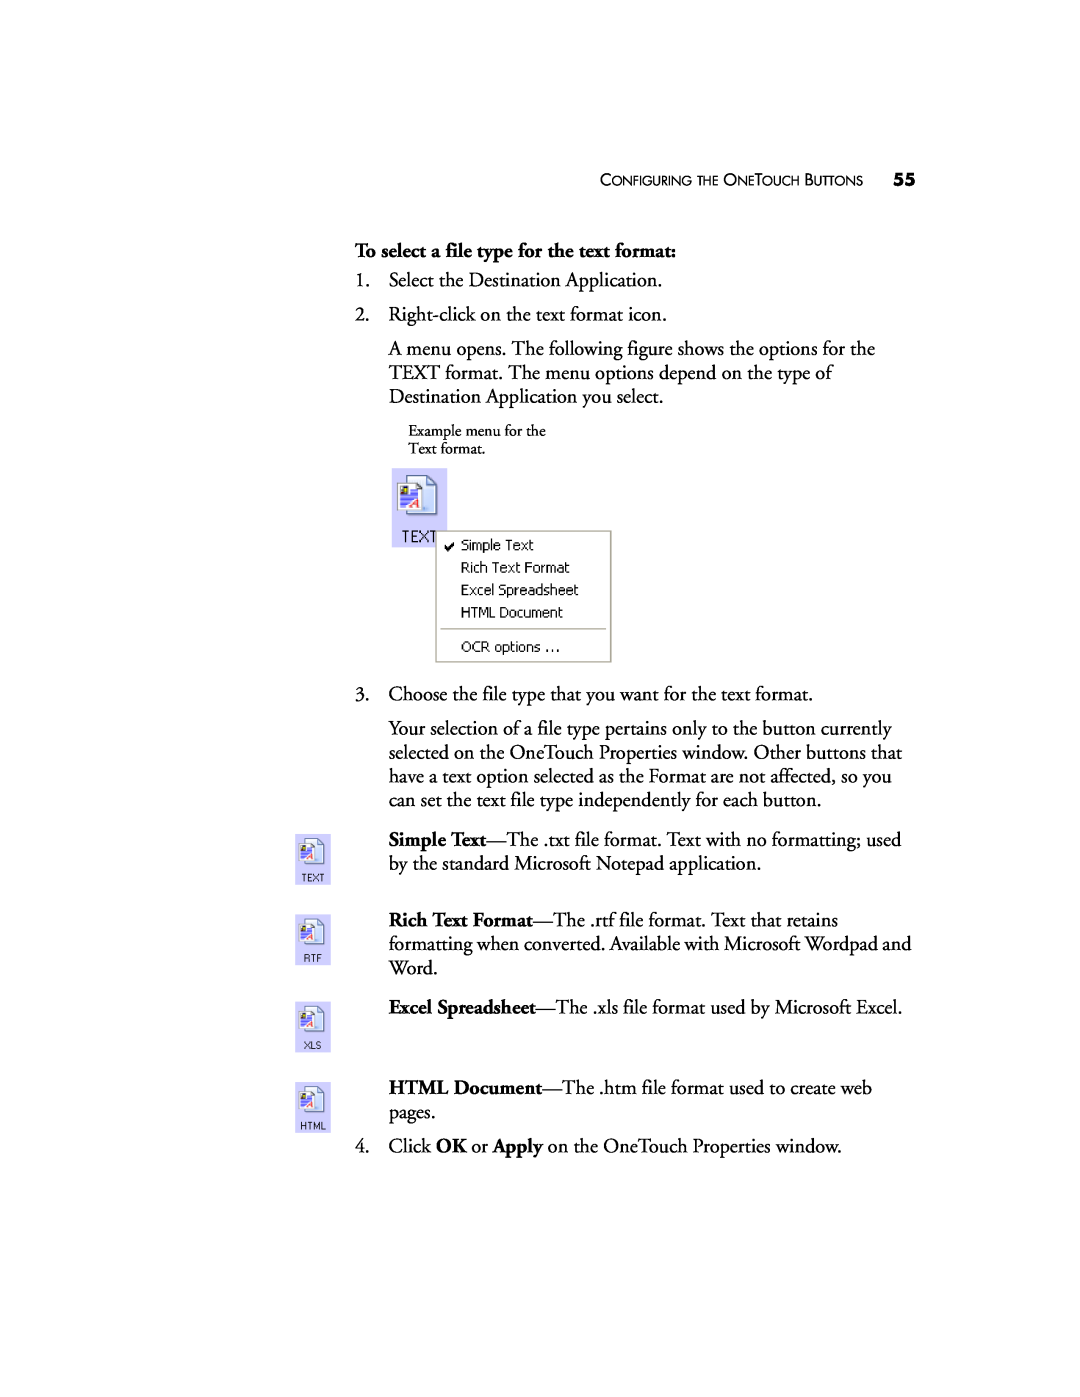 Visioneer 9750 manual To select a file type for the text format, Example menu for the Text format 